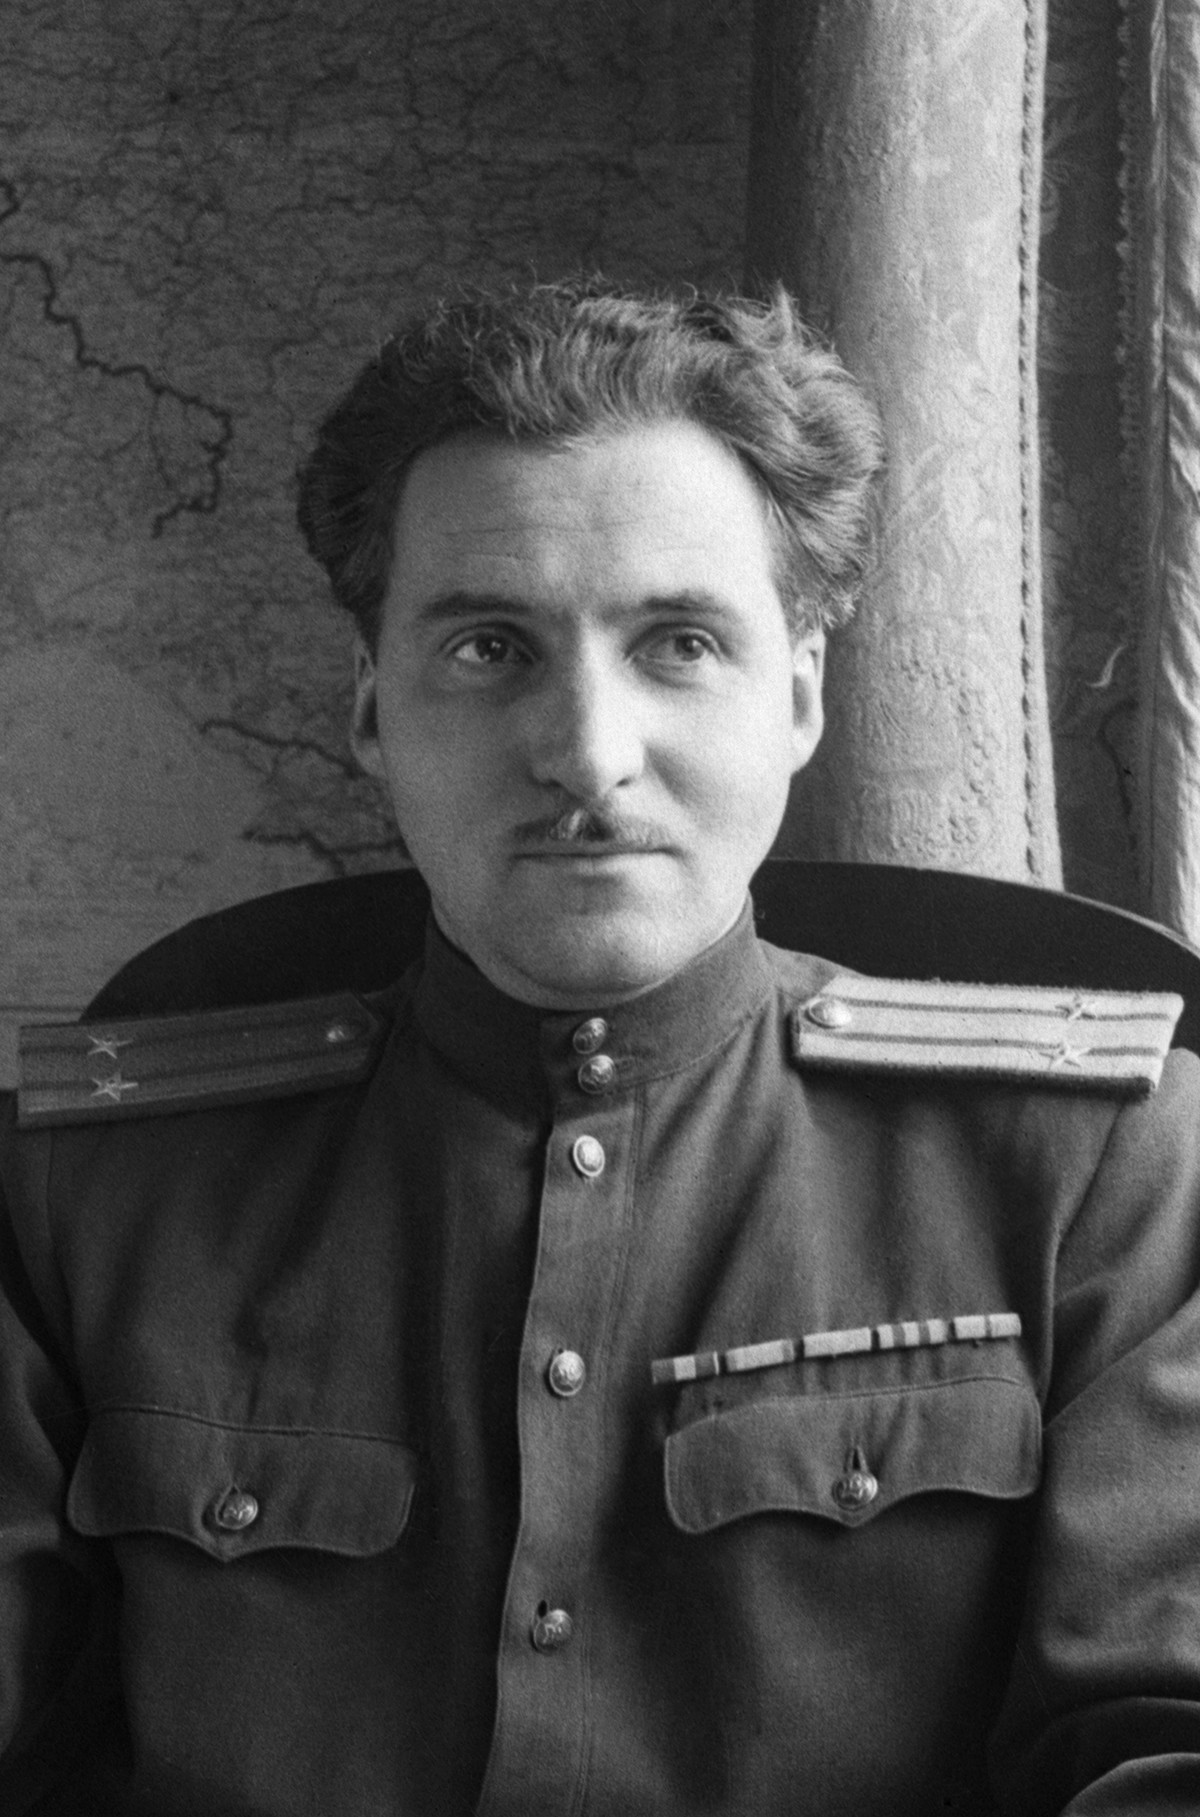 Konstantin Simonov’s poem ‘Wait For Me’ became a symbol of hope for millions of Red Army soldiers. 